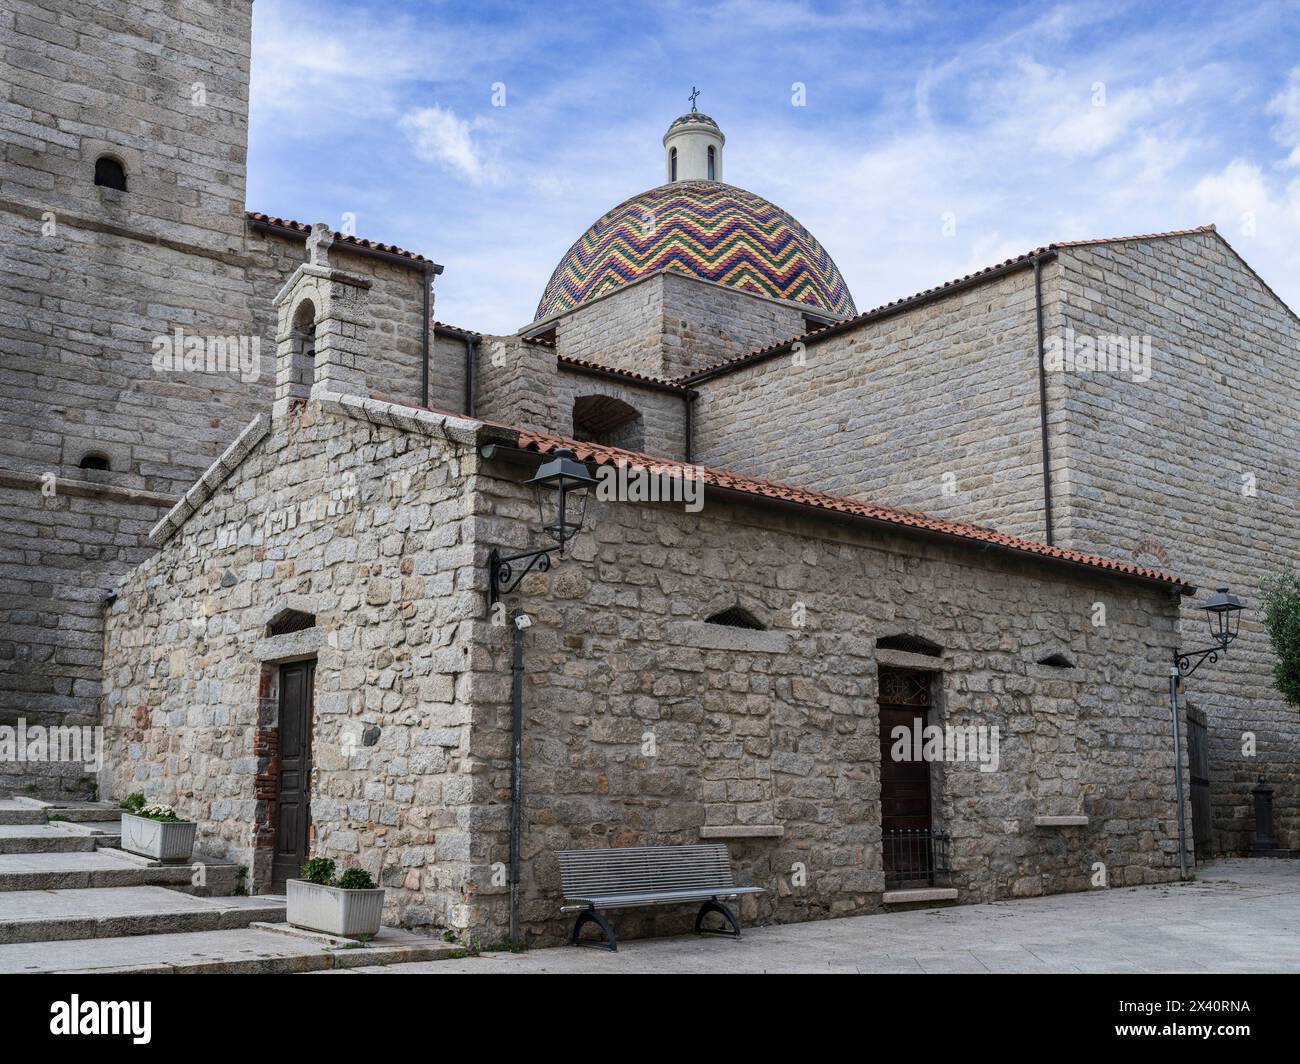 Church with colourful mosaic dome and weathered stone walls in Olbia, Italy; Olbia, Sassari, Italy Stock Photo